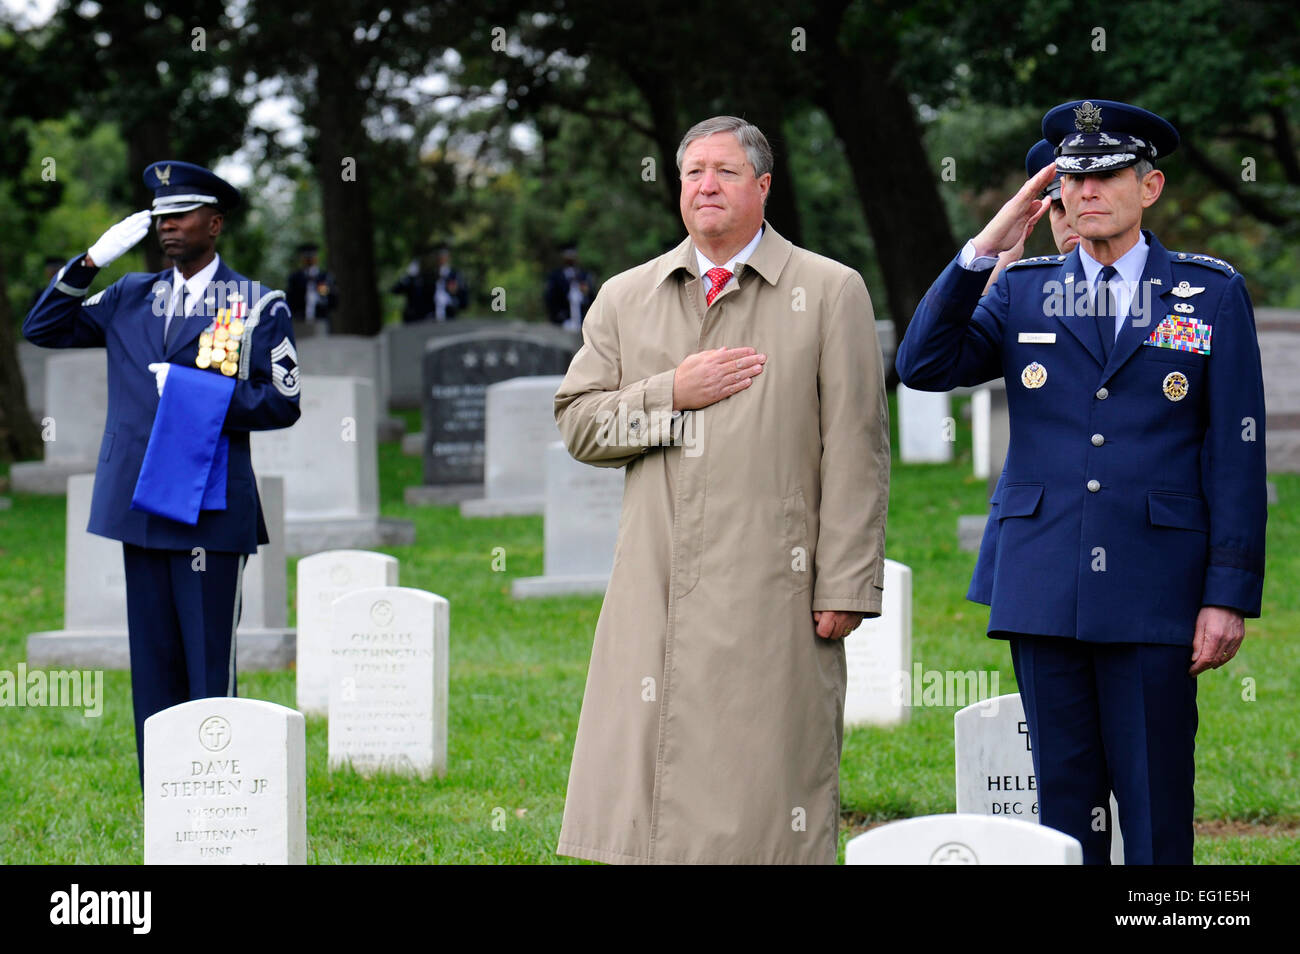 FFSecretary of the Air Force Michael Donley and Air Force Chief of Staff Gen. Norton Schwartz pay their respects Oct. 3, 2011, at Arlington National Cemetery, Va., during the full-honors funeral of retired Maj. Gen. John Alison. Alison was a war hero and founding father of the Air ForceÕs special operations forces, having served with the Flying TigersÕ 75th Fighter Squadron and the 1st Air Commando Group during World War II. Tech. Sgt. Raymond Mills Stock Photo